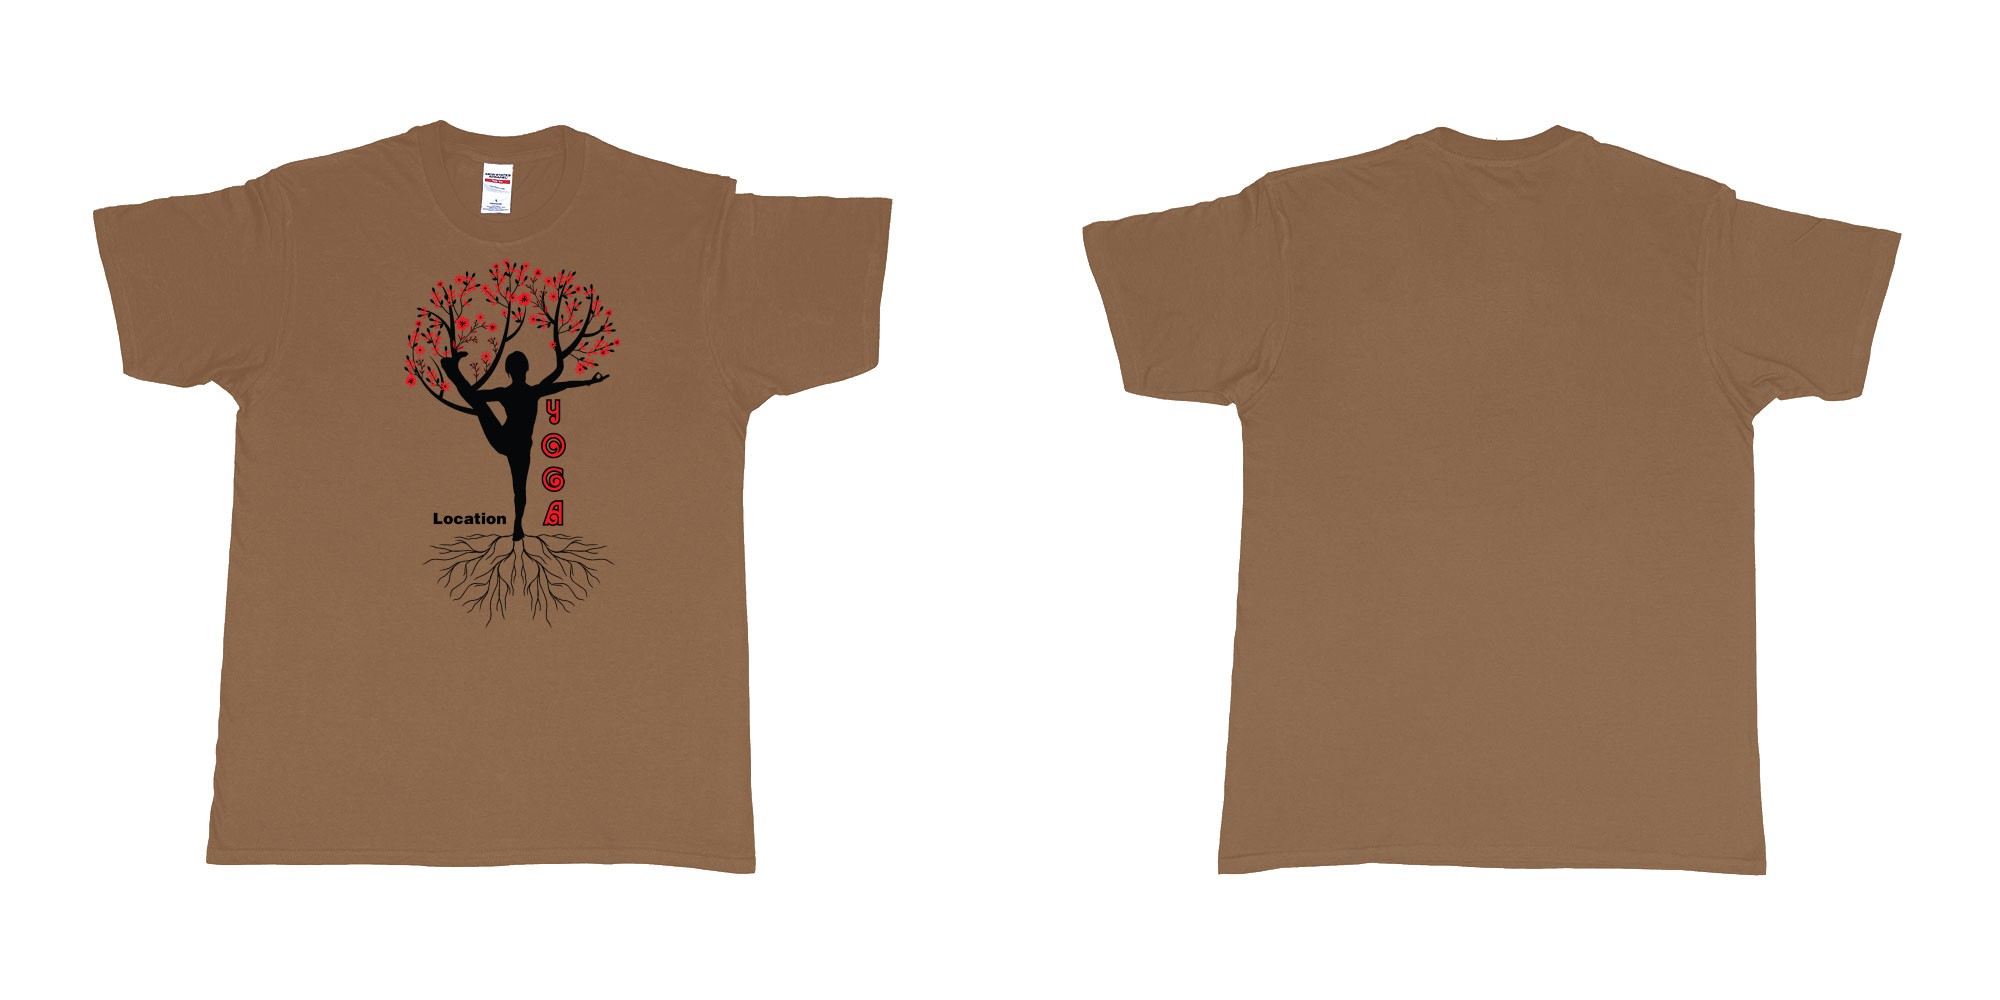 Custom tshirt design yoga tree of life is blooming own logo location design in fabric color chestnut choice your own text made in Bali by The Pirate Way